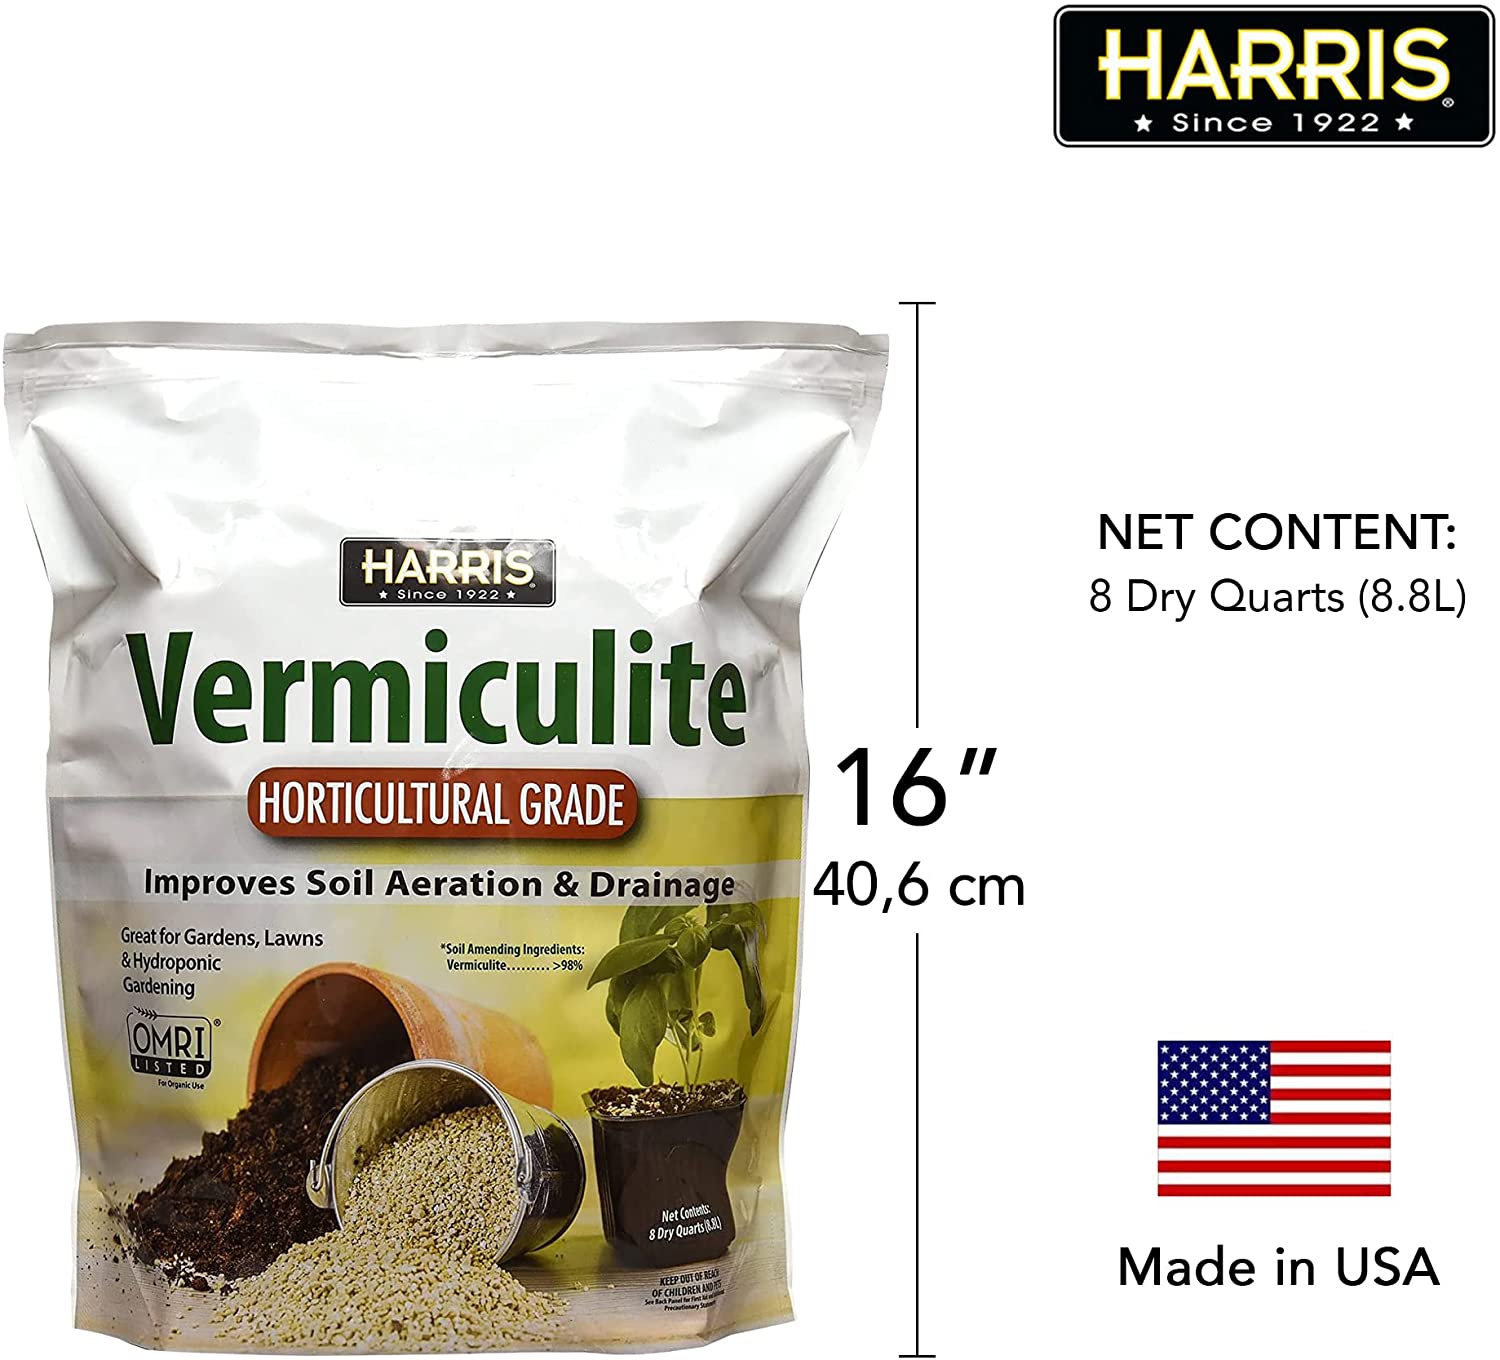 What Is Vermiculite? How to Use It